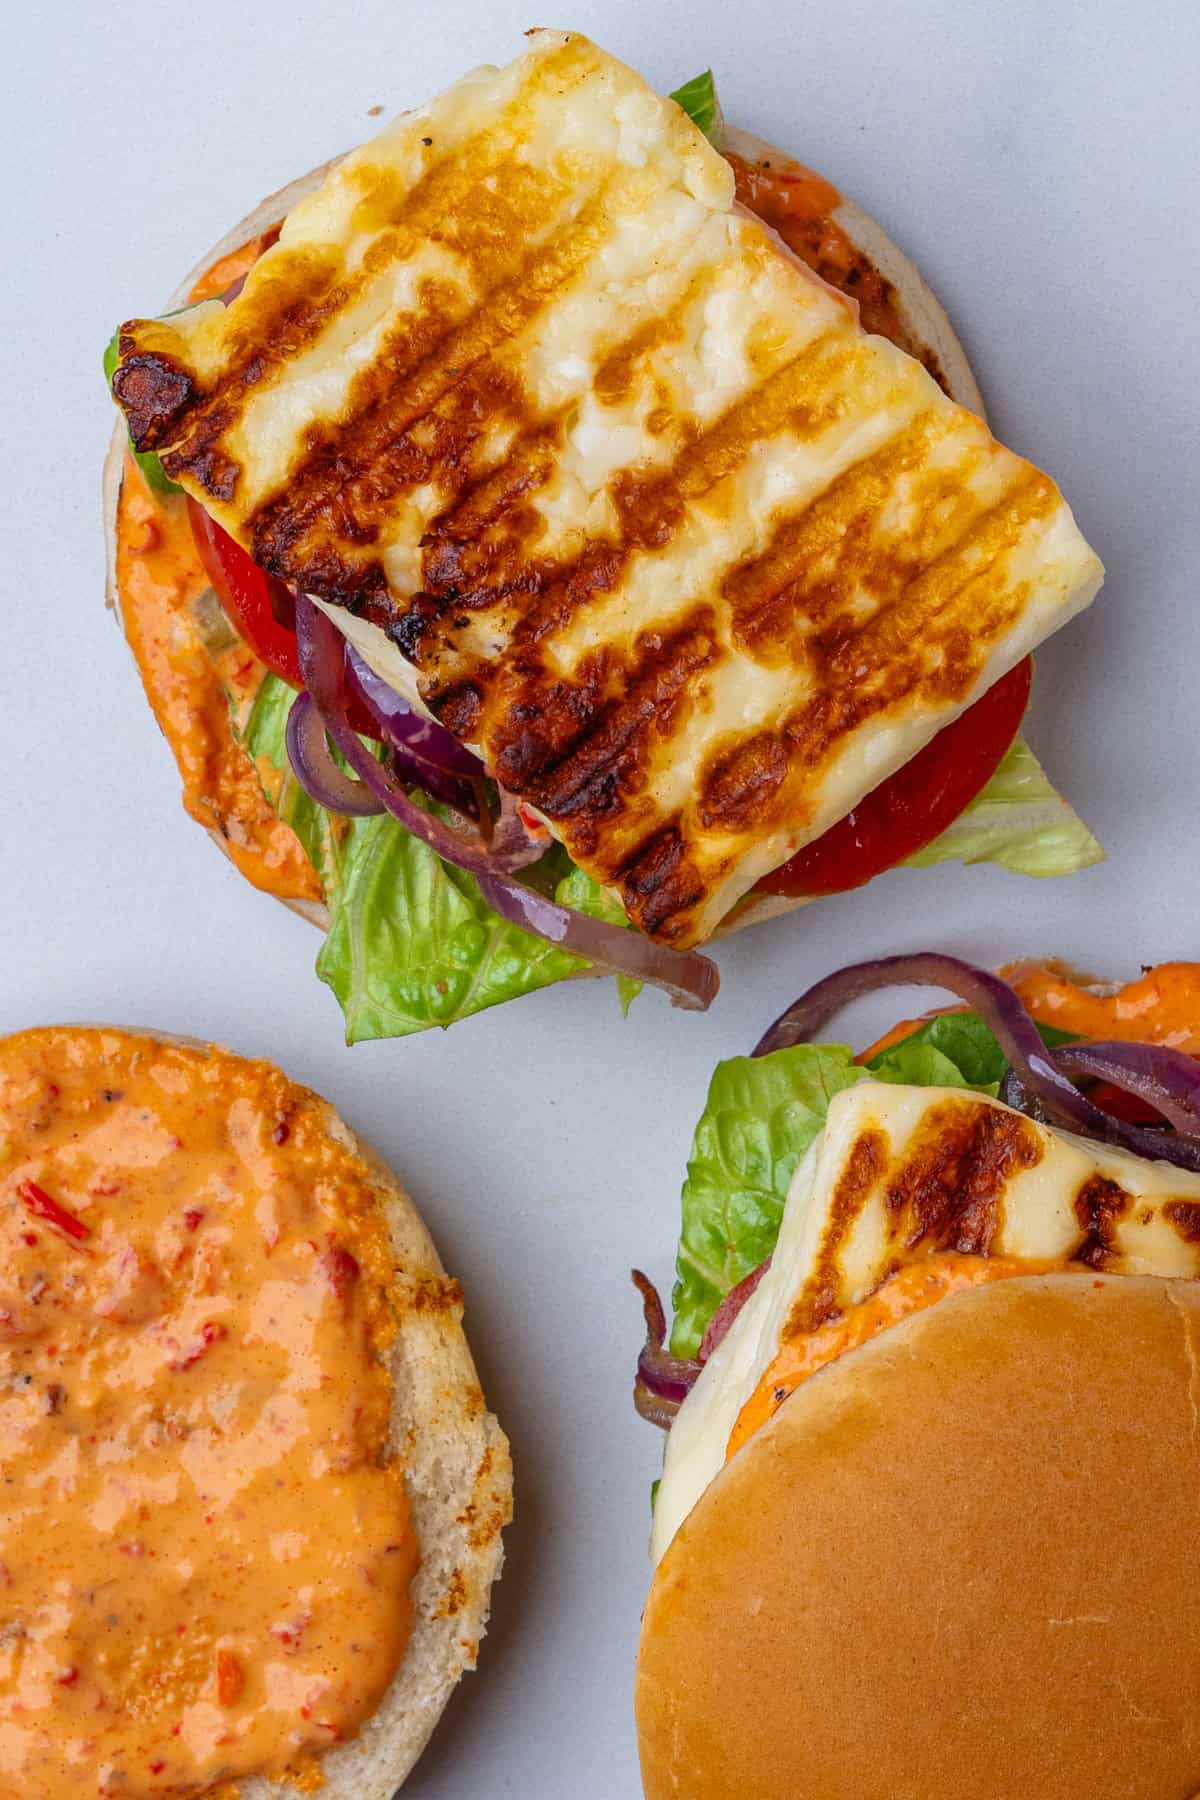 Halloumi burgers one open and one closed